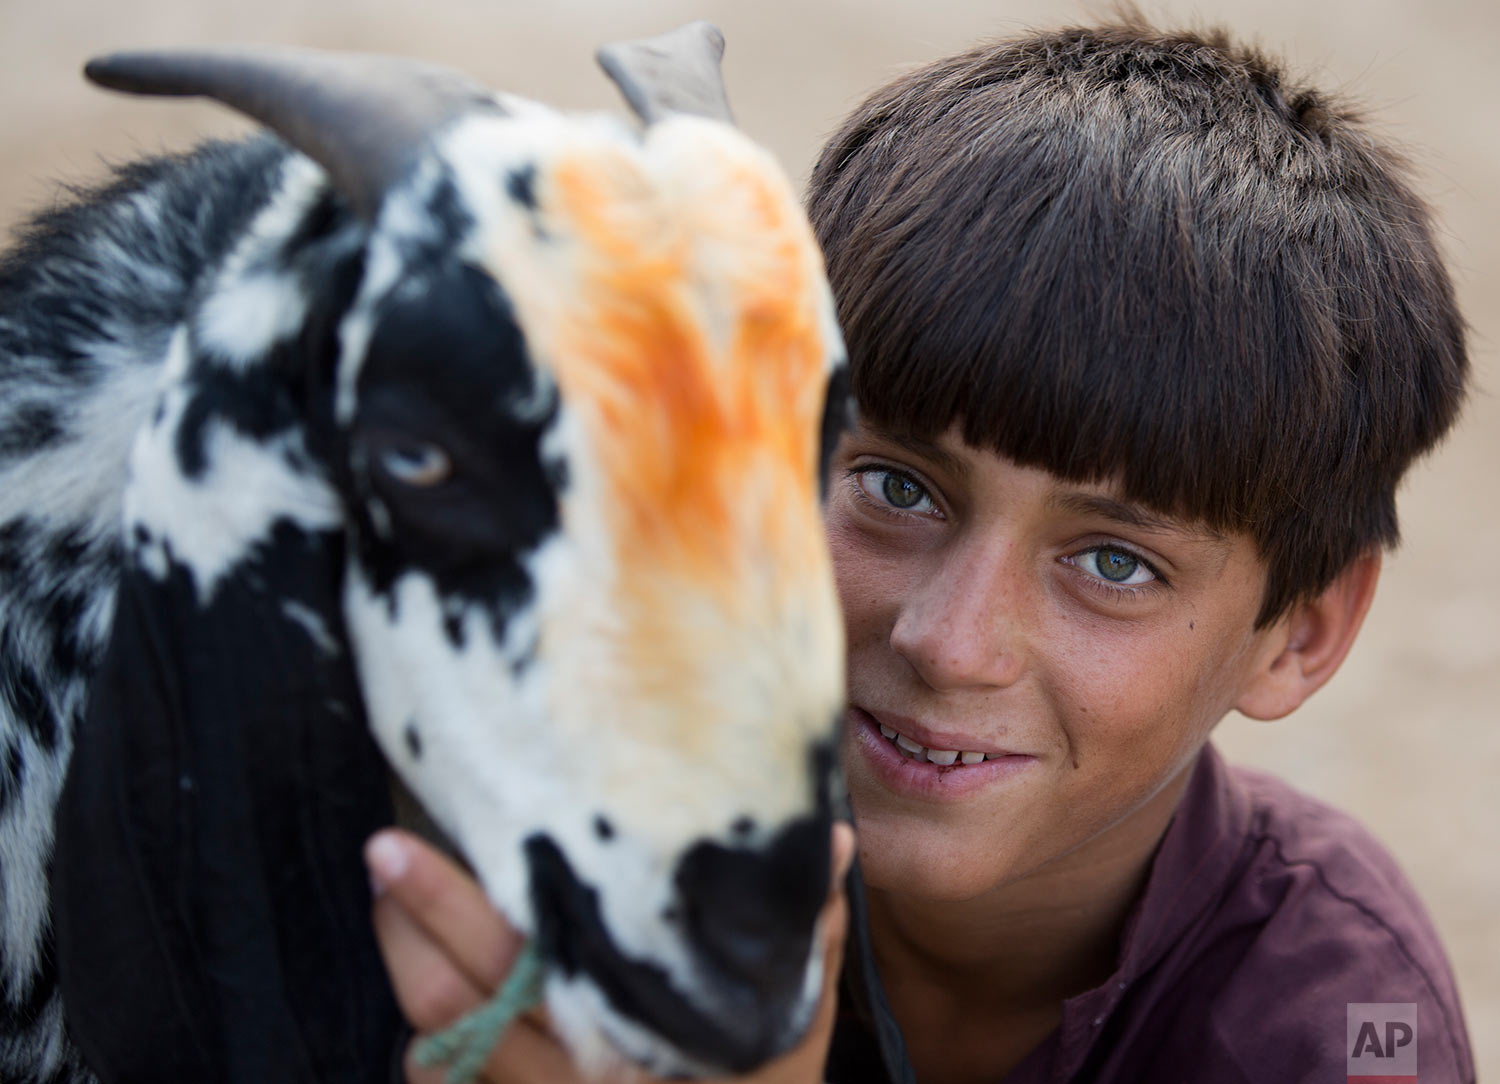  Ibrahim poses with his animal at a cattle market ahead of Muslim Eid al-Adha holiday in Islamabad, Pakistan, Friday, Aug. 25, 2017. Eid al-Adha, or Feast of Sacrifice, most important Islamic holiday marks the willingness of the Prophet Ibrahim (Abra